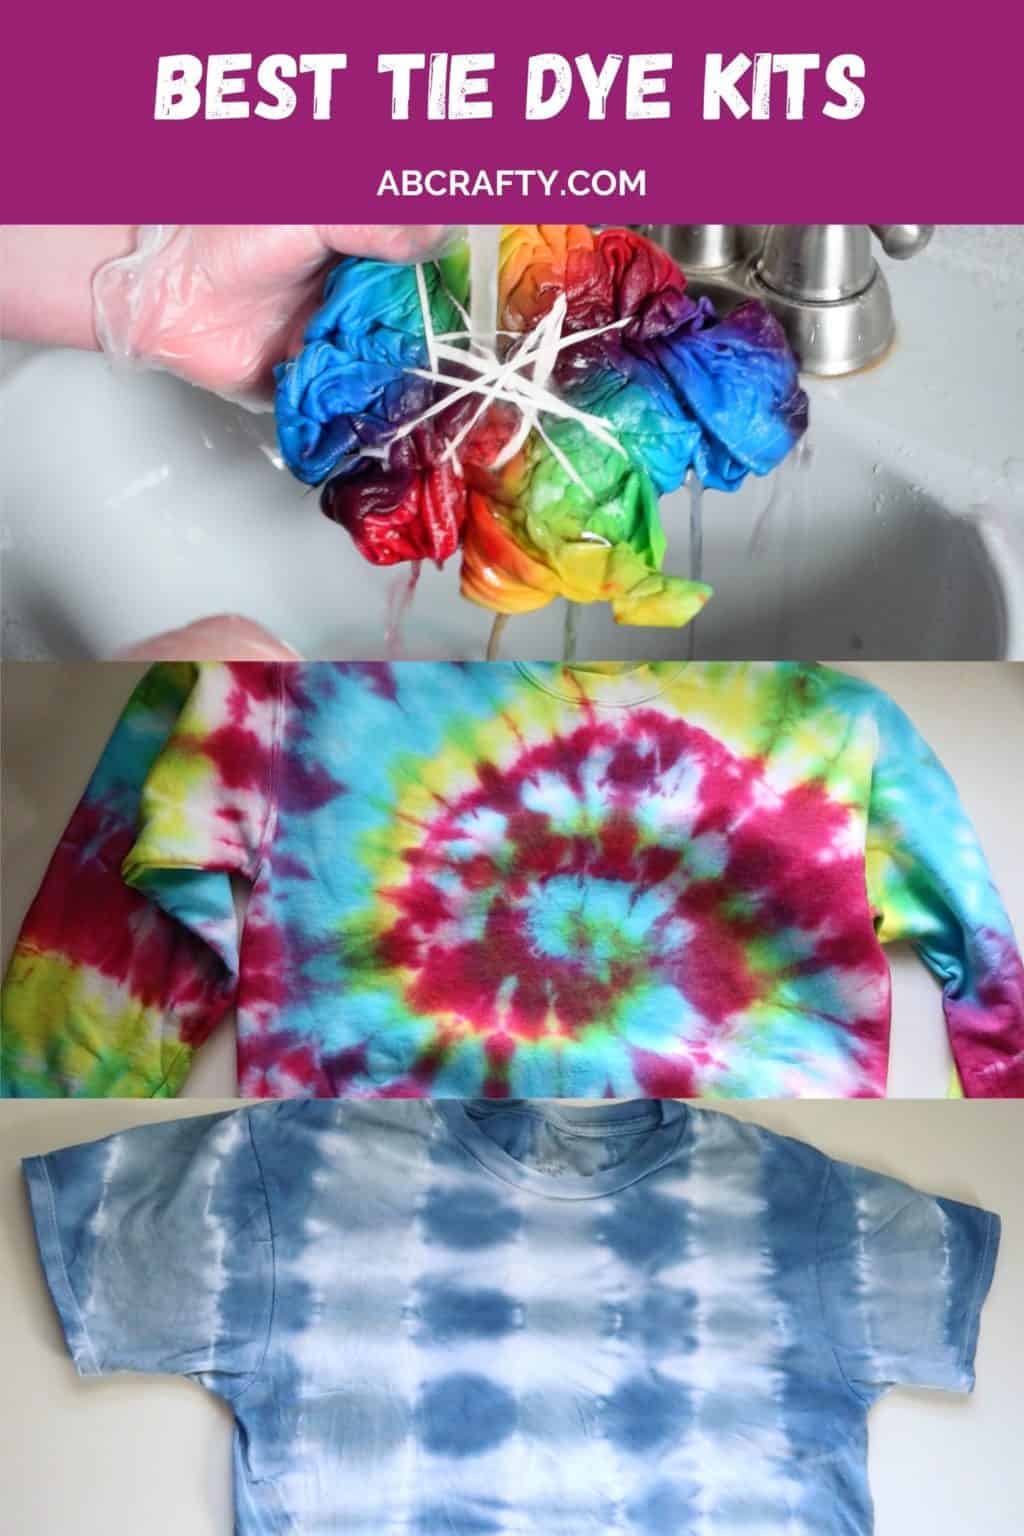 a tie dye shirt and sweatshirt and rinsing a dyed shirt with the title "best tie dye kits"